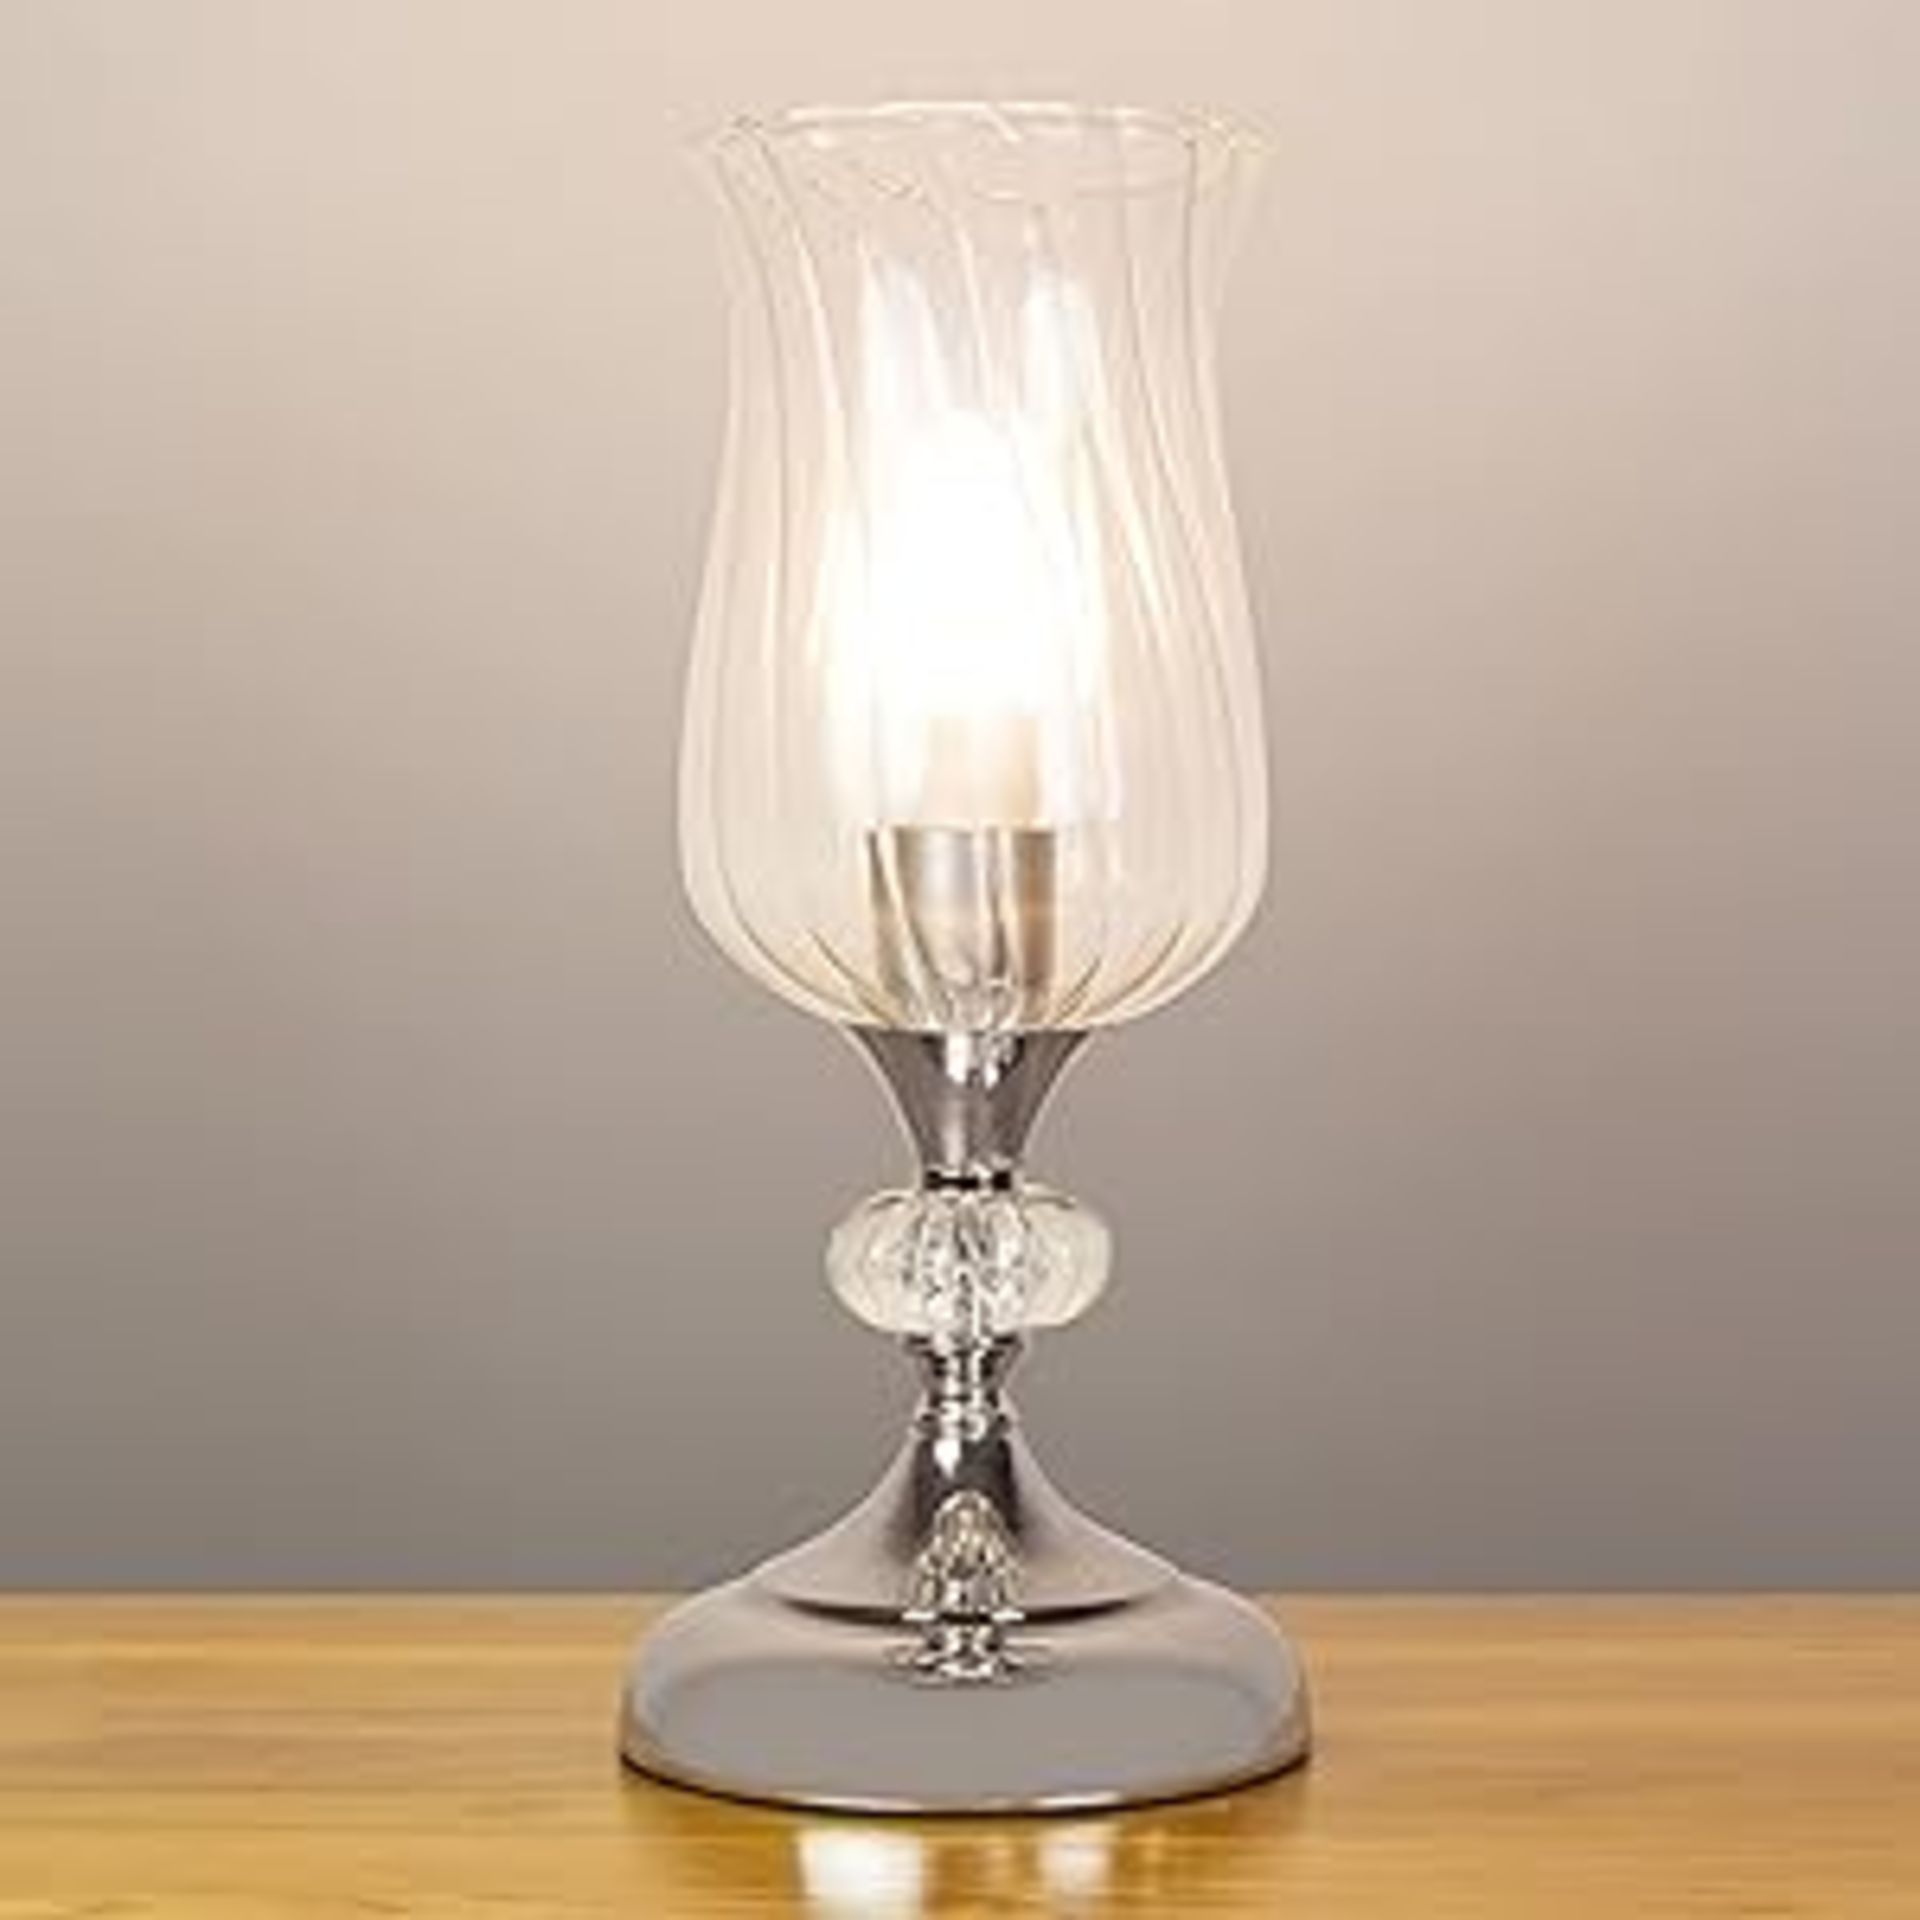 2 x Anika 62519 Hurricane Table Lamp with Touch Activated Base / 3 Brightness Settings / Easy to